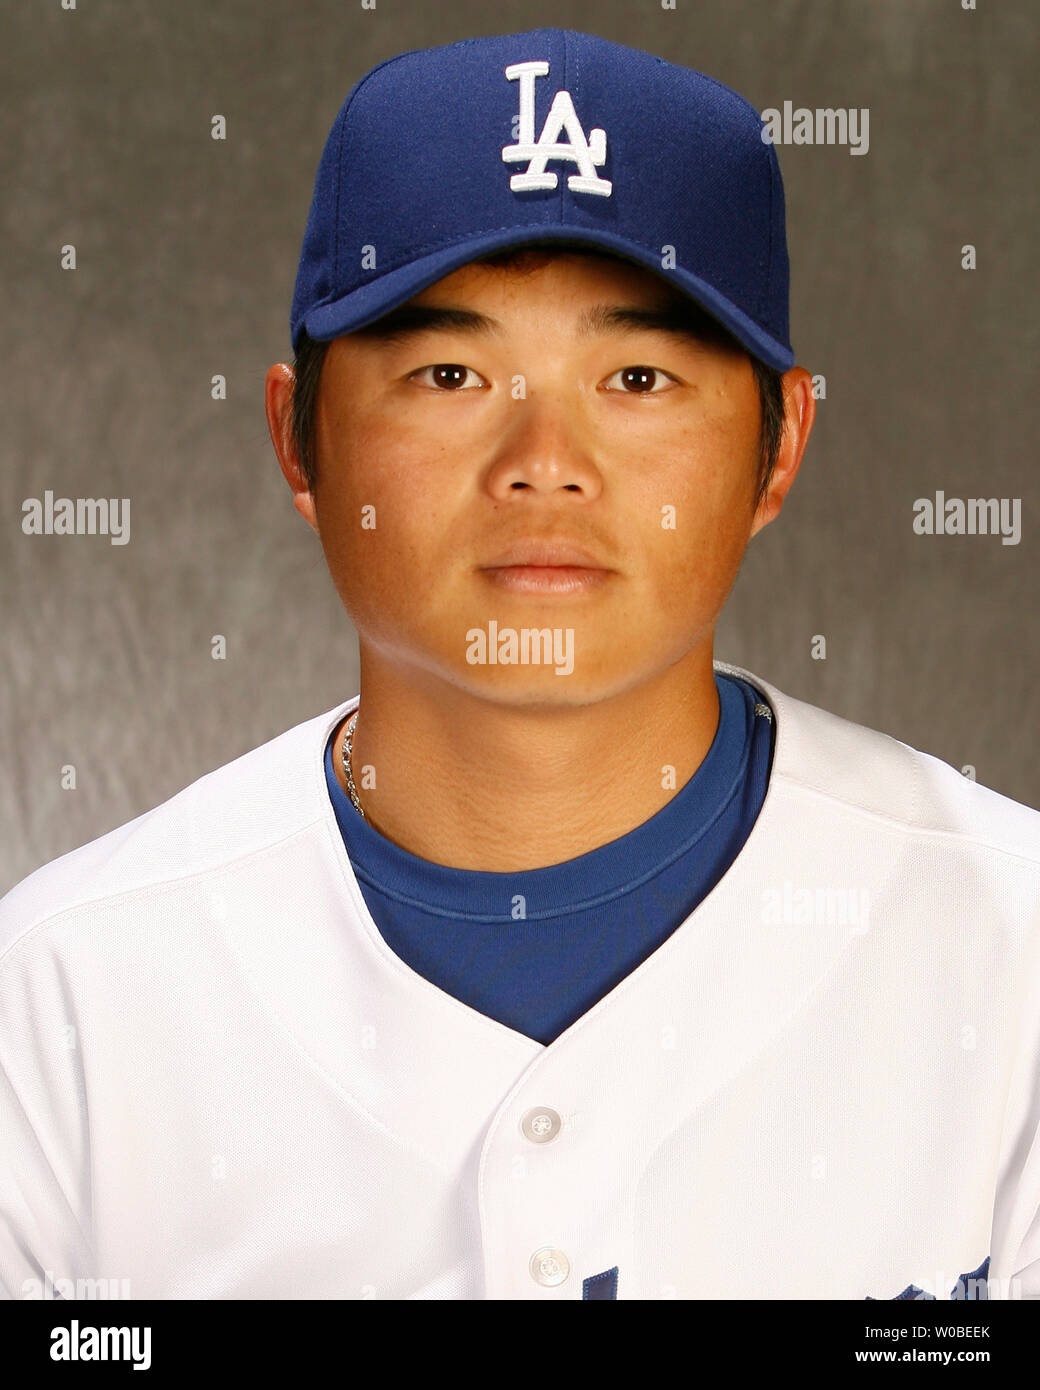 Los Angeles Dodgers infielder Chin Lung Hu, of Taiwan, poses for the camera on Major League Photo Day  February 27, 2007 at Dodgertown in Vero Beach, Florida.  (UPI Photo/ Jon SooHoo) Stock Photo